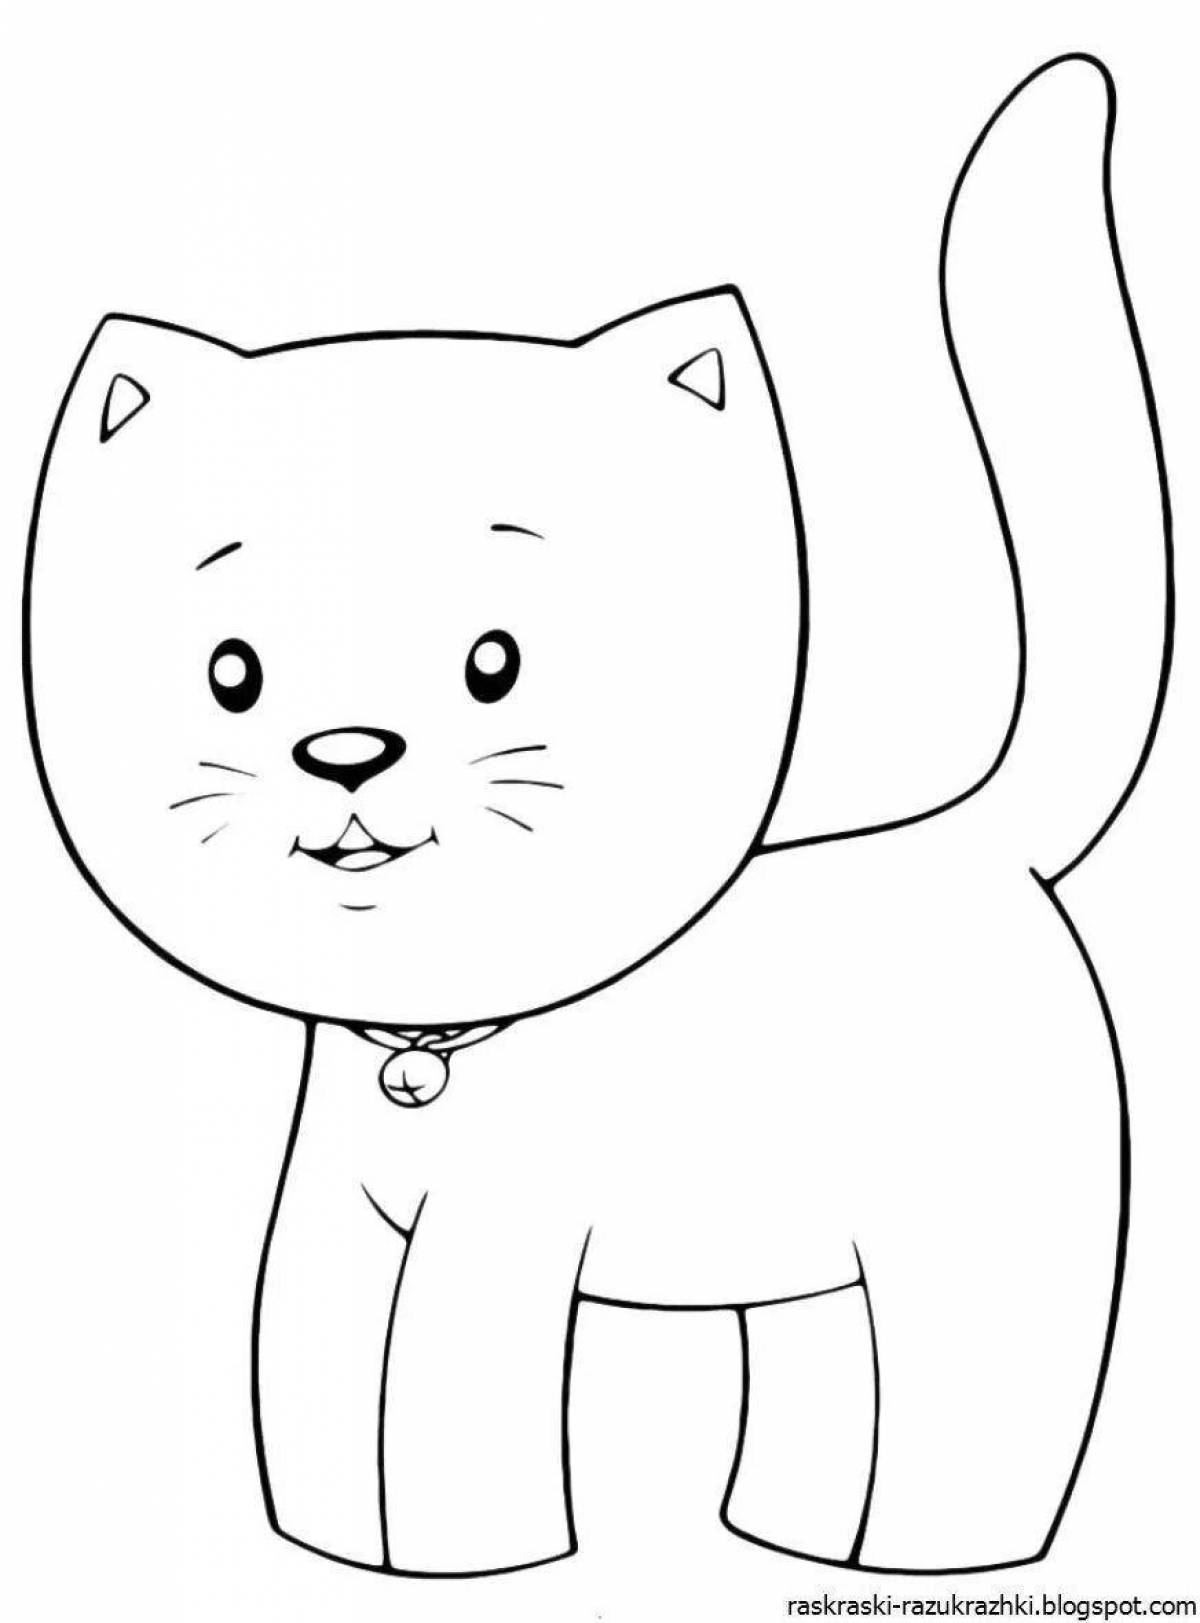 Coloring page playful cat without whiskers